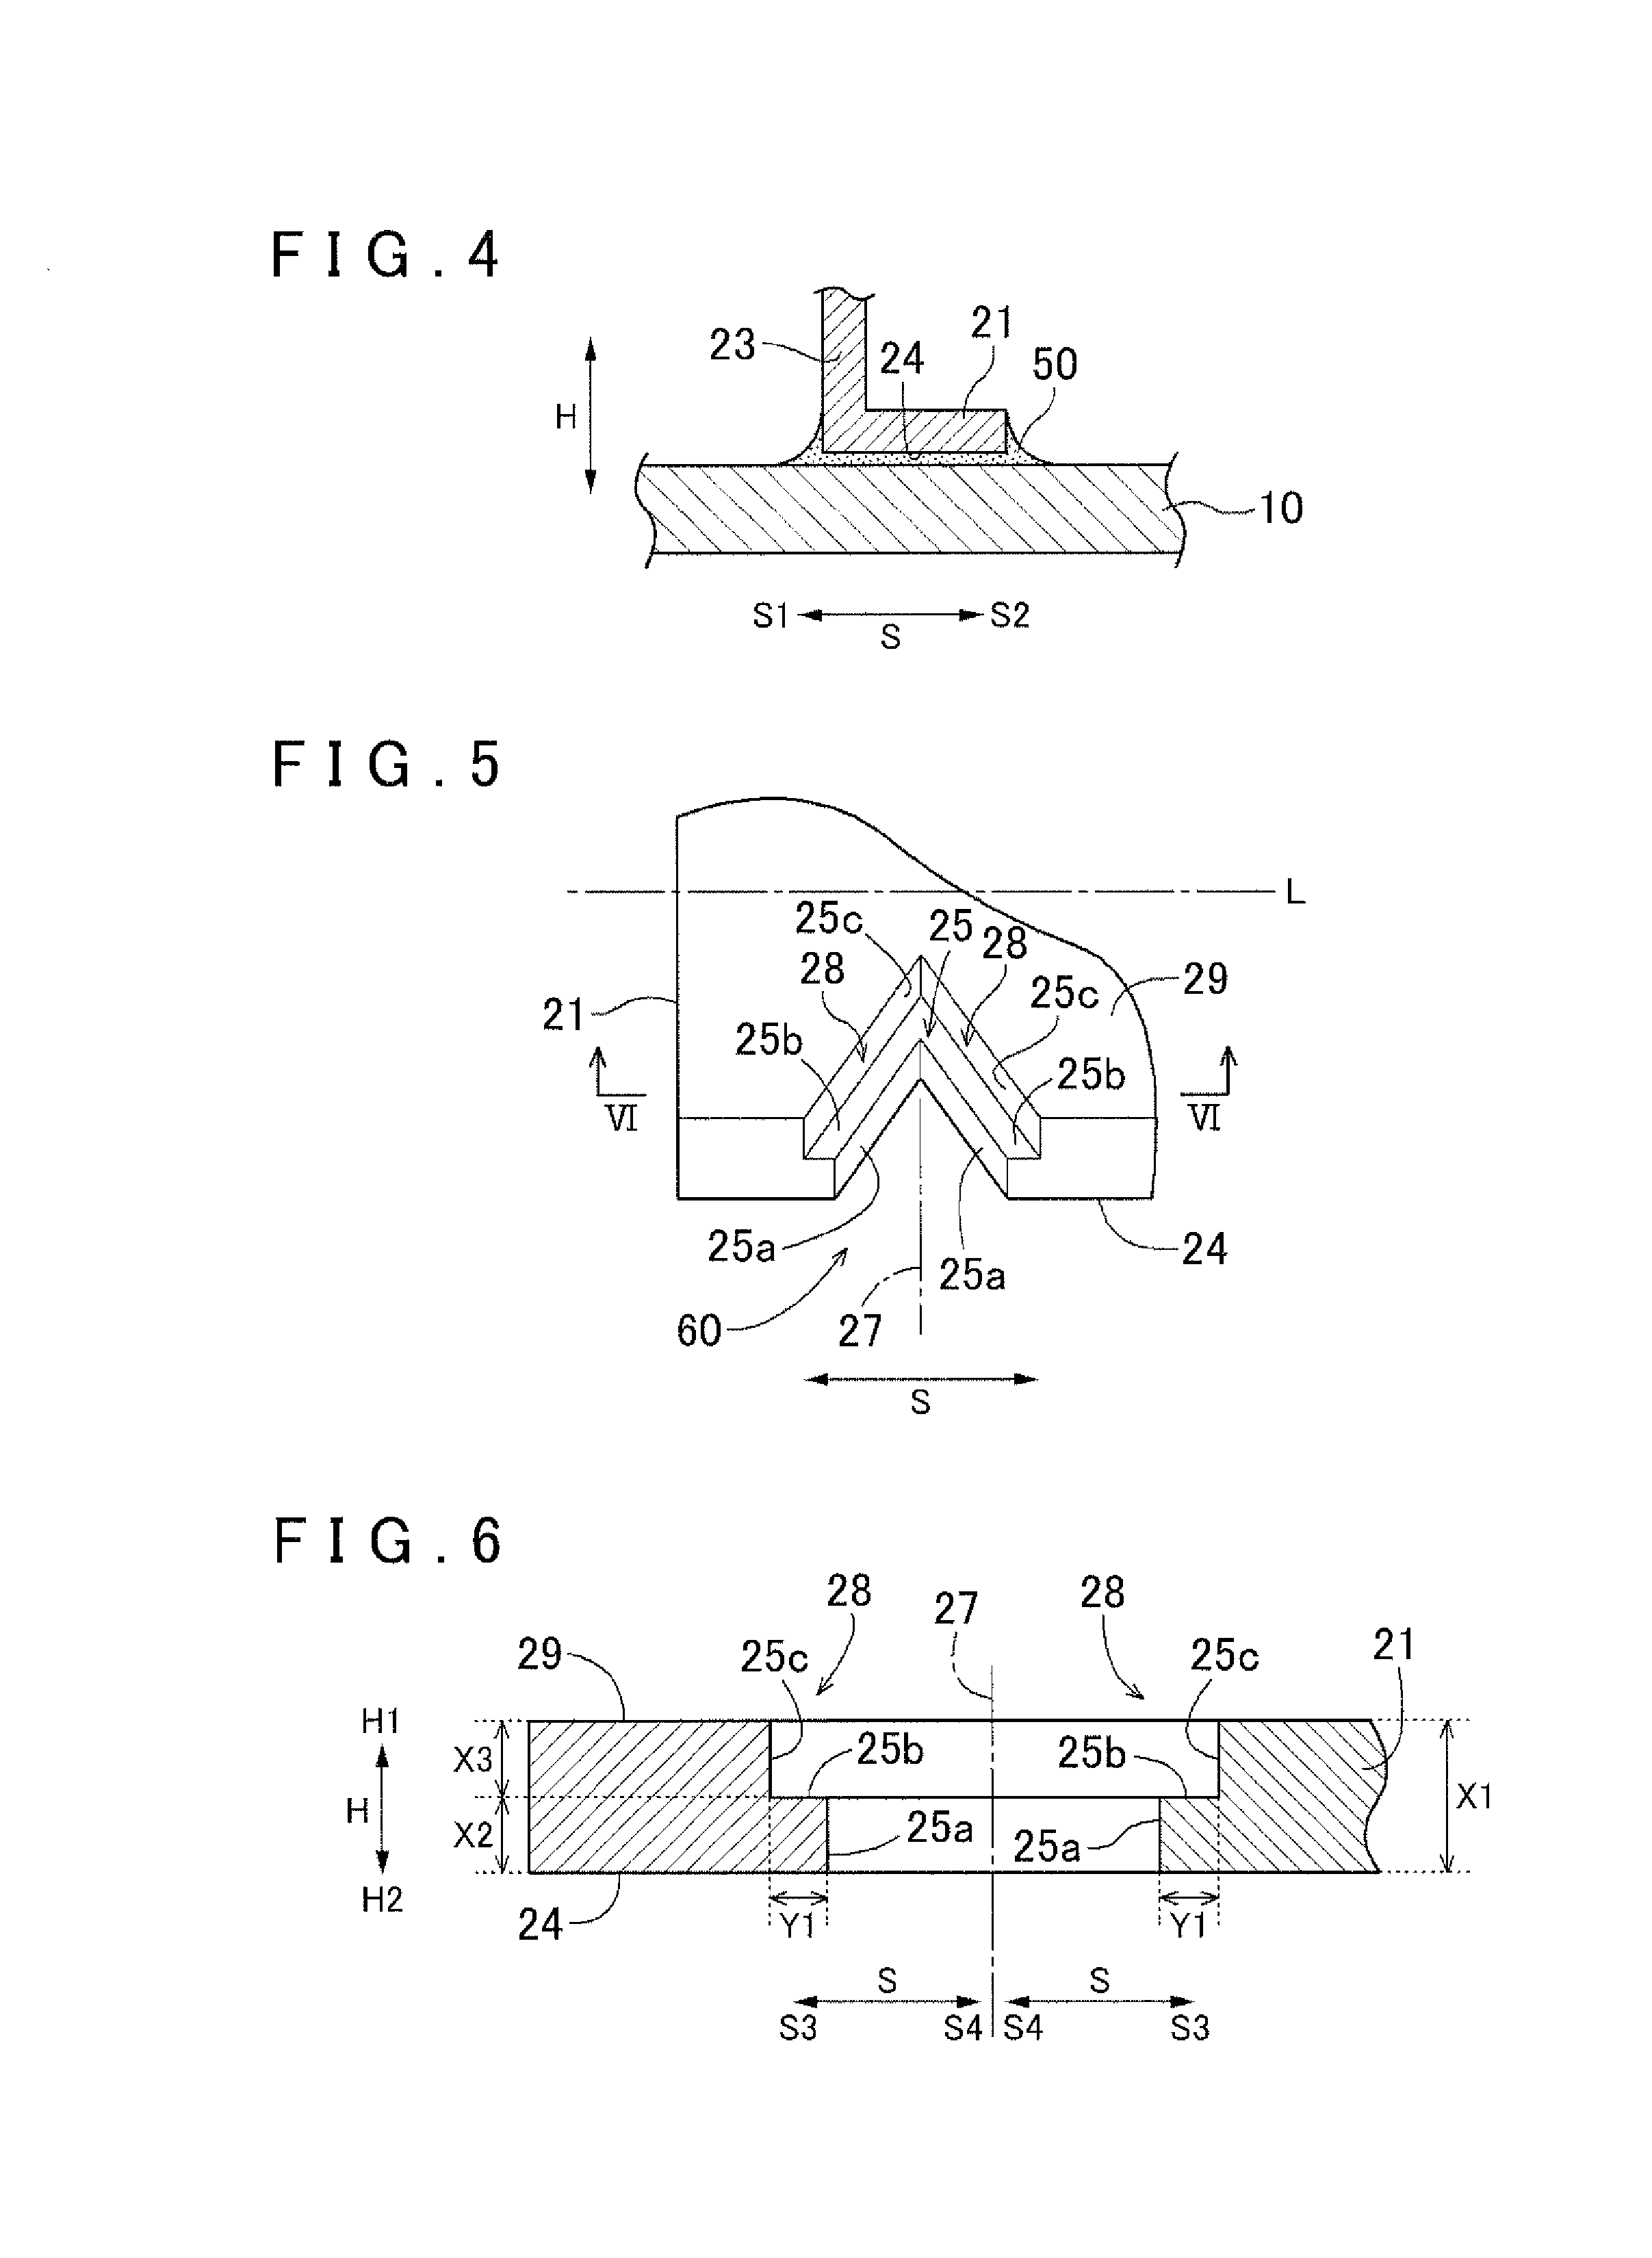 Connection terminal and circuit component